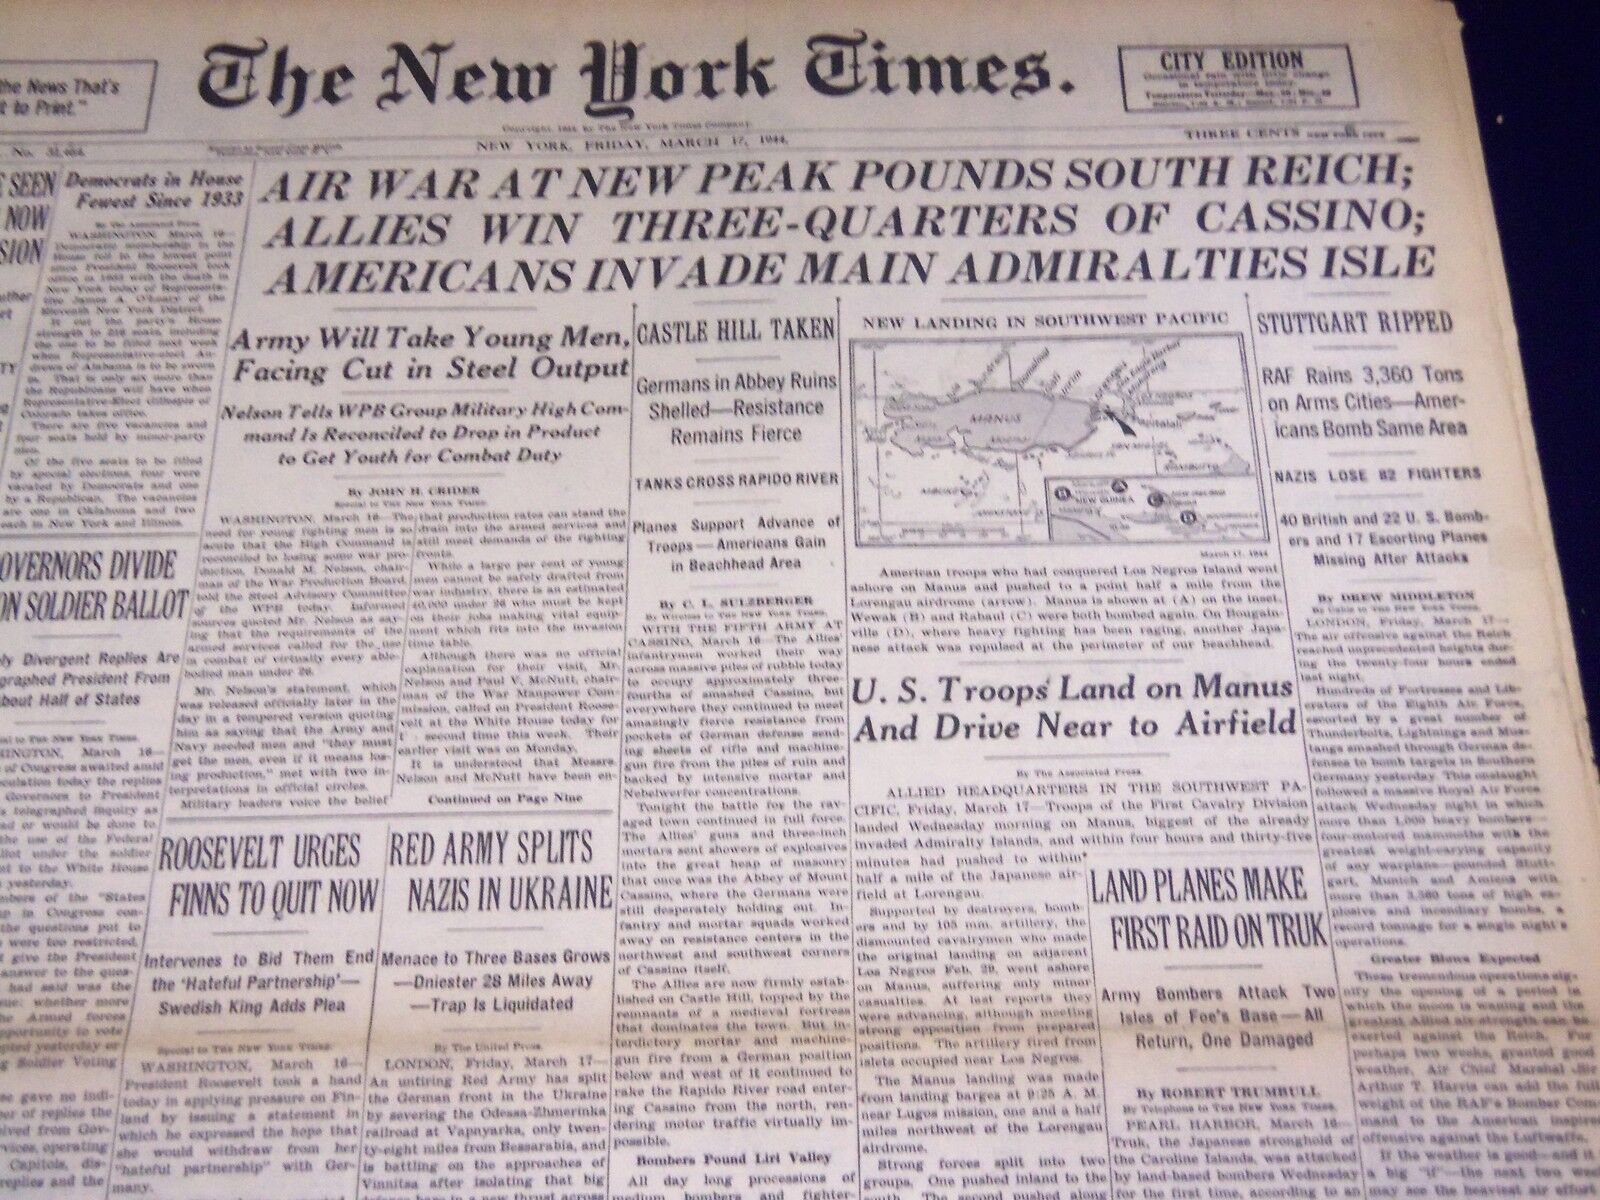 1944 MAR 17 NEW YORK TIMES - AIR WAR AT NEW PEAK POUNDS REICH - NT 1832